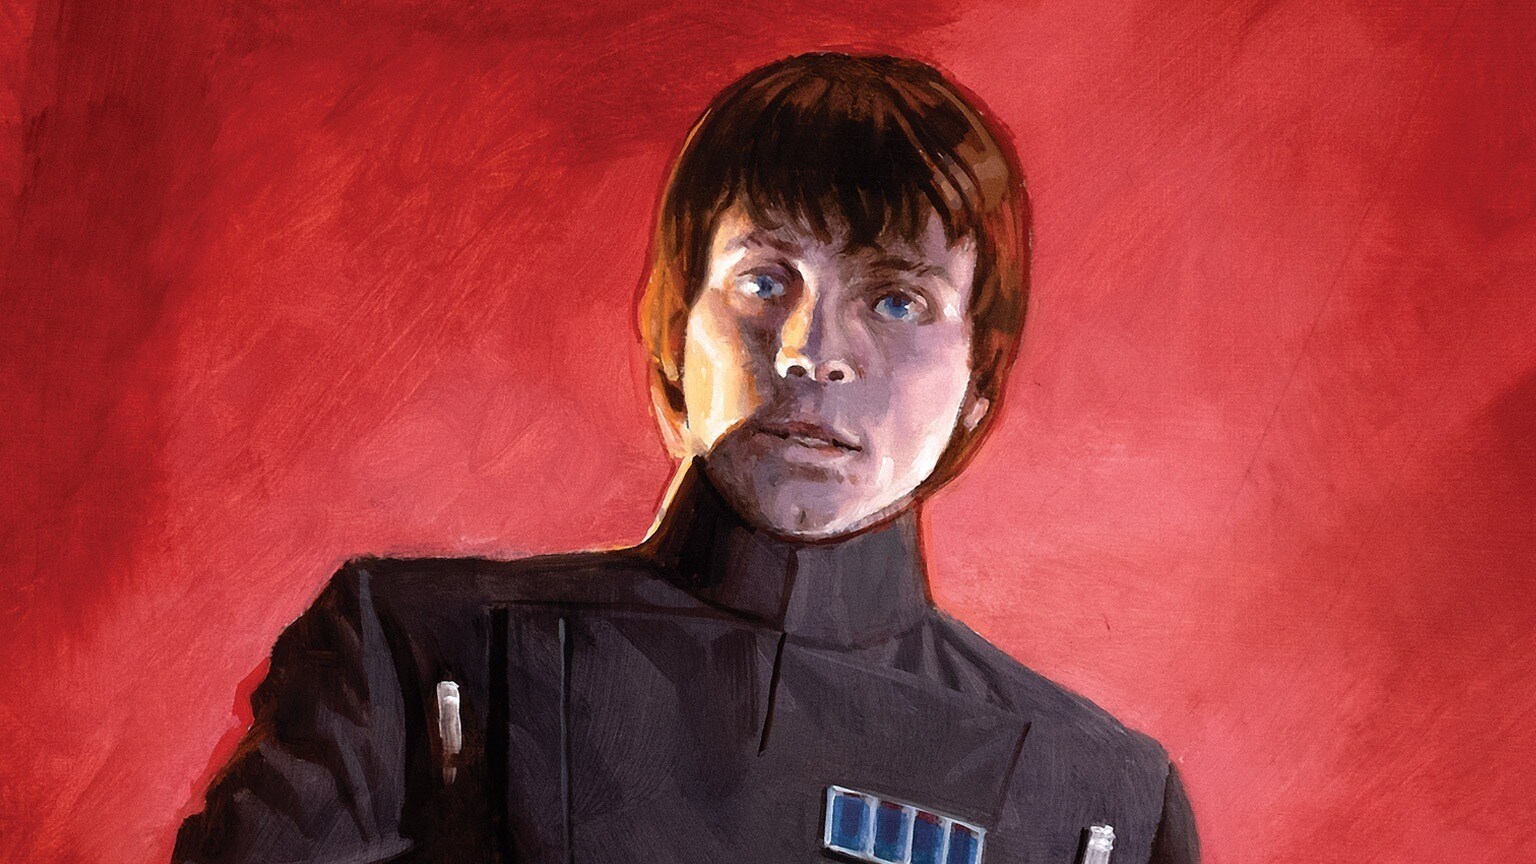 Luke Goes Undercover in Marvel’s Star Wars #28 - Exclusive Preview